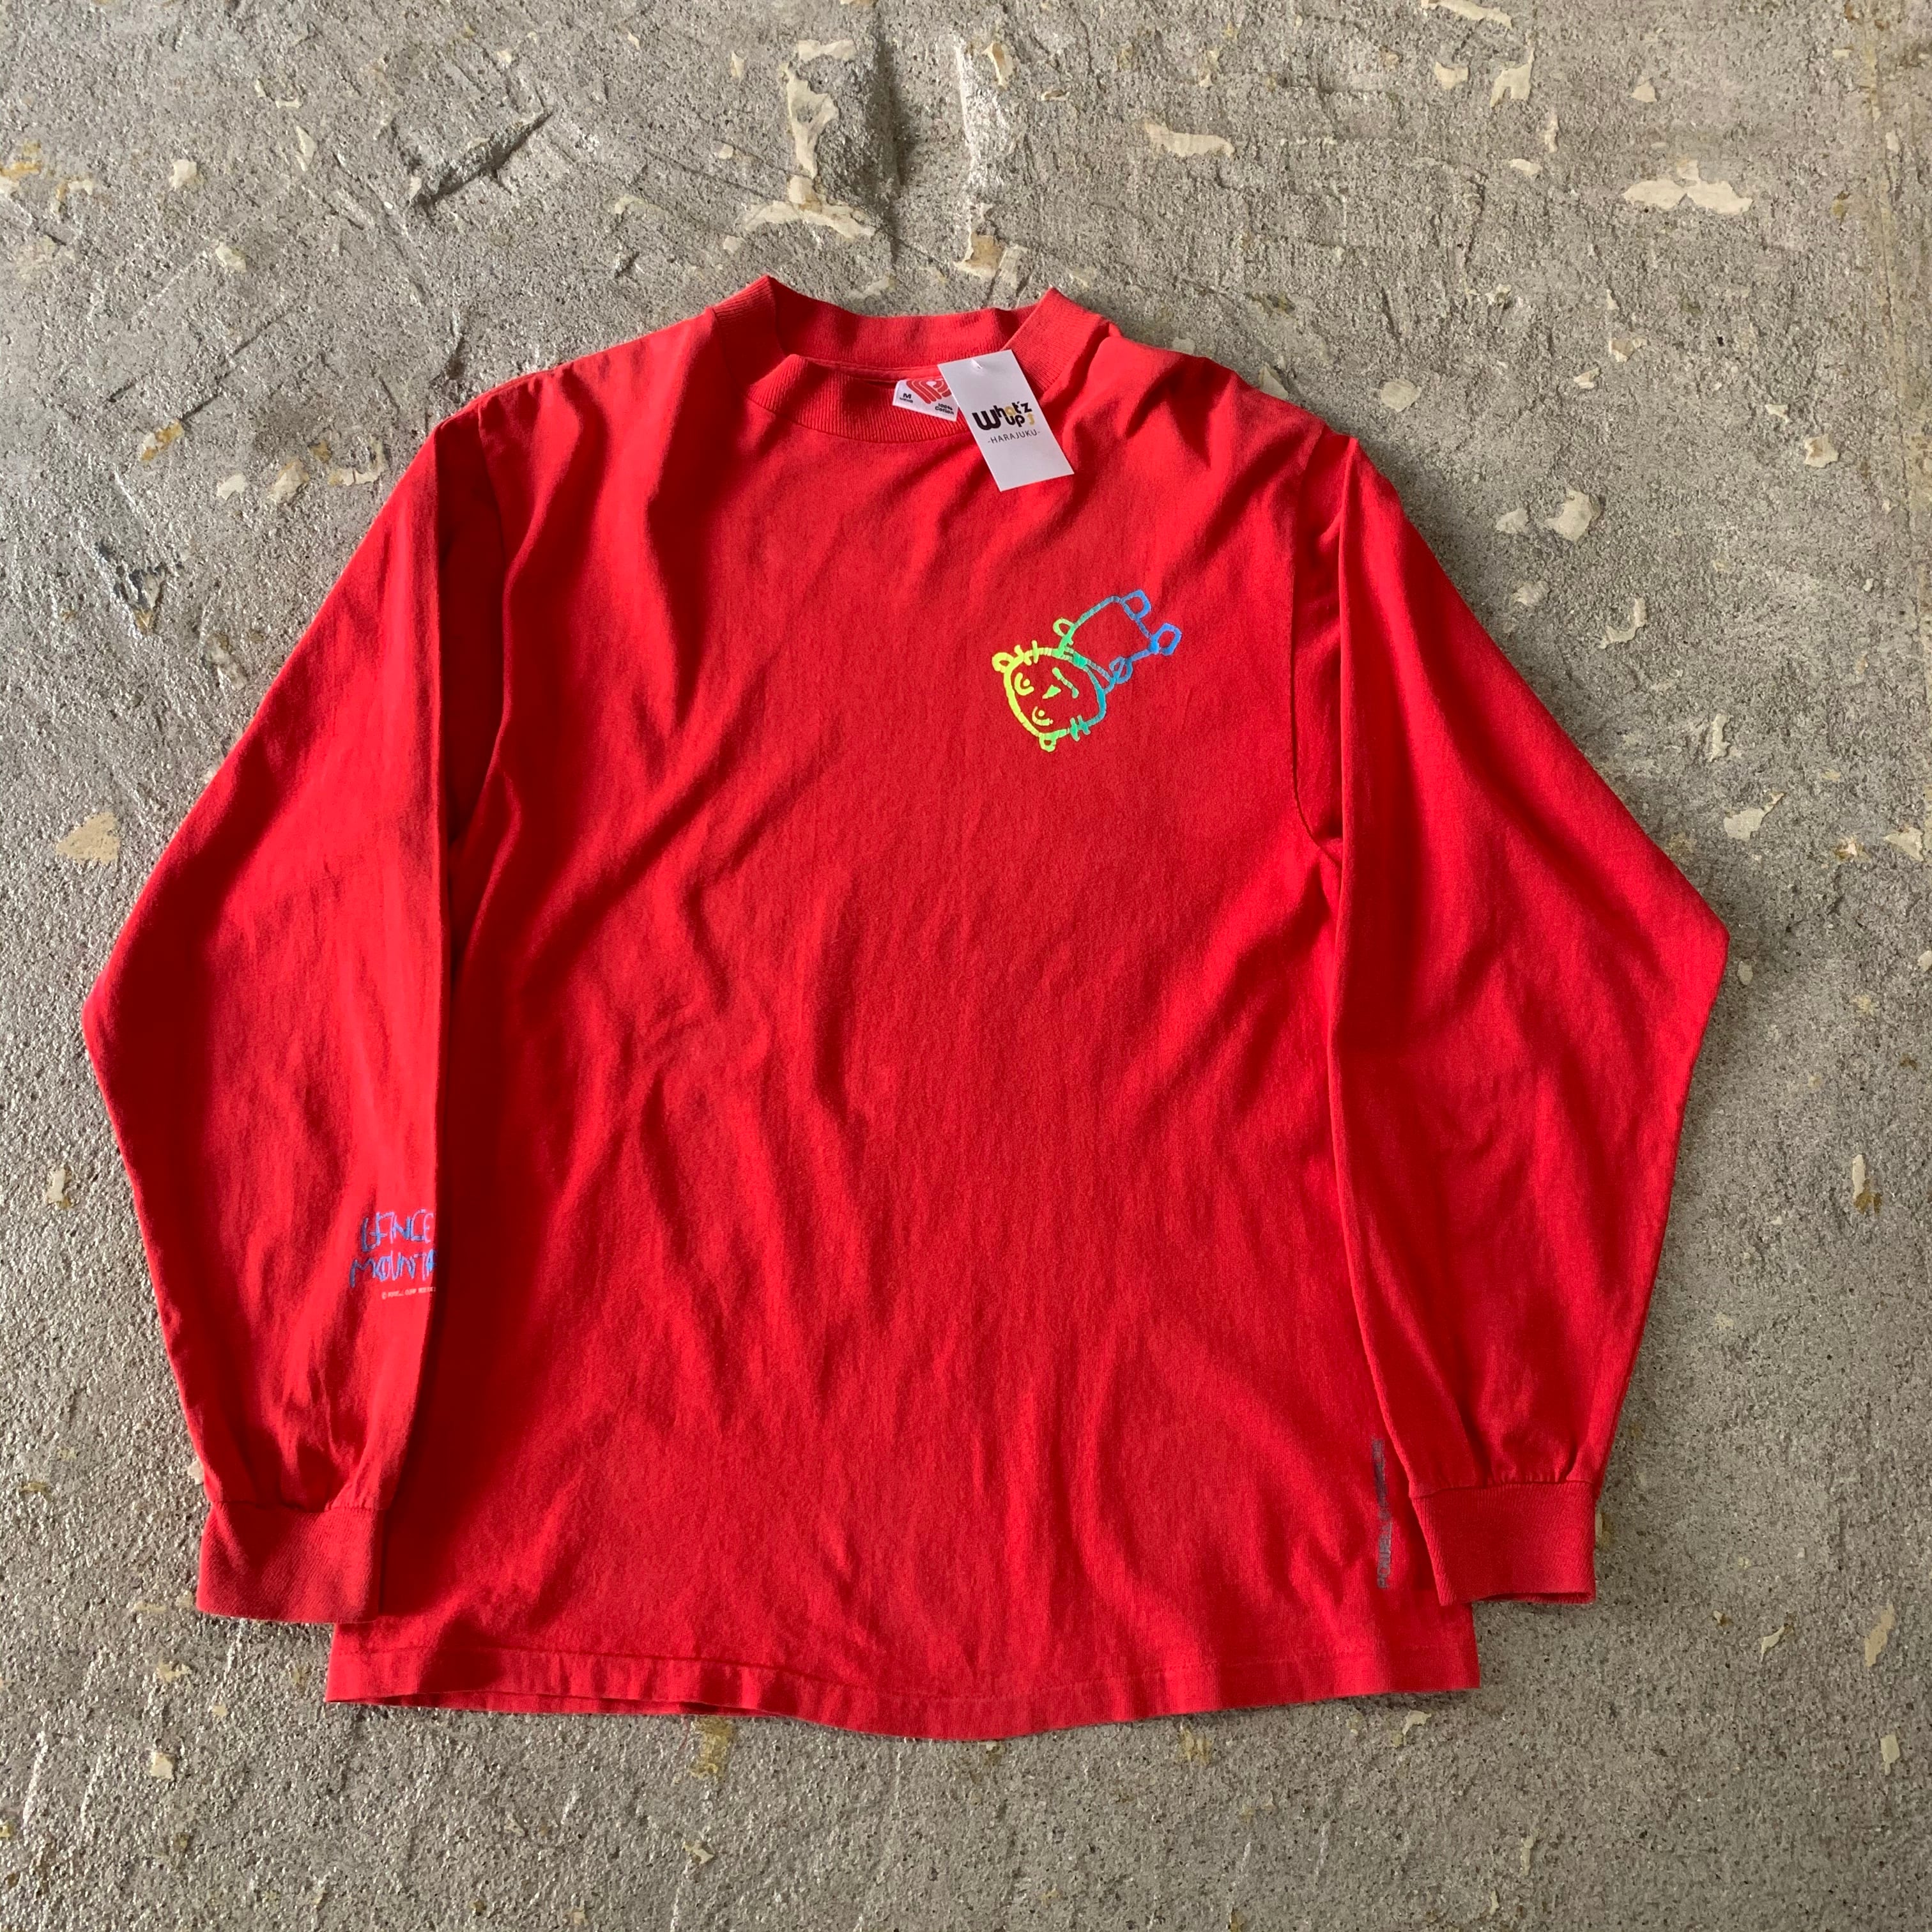 s powell peralta L/S T shirt   What’z up powered by BASE